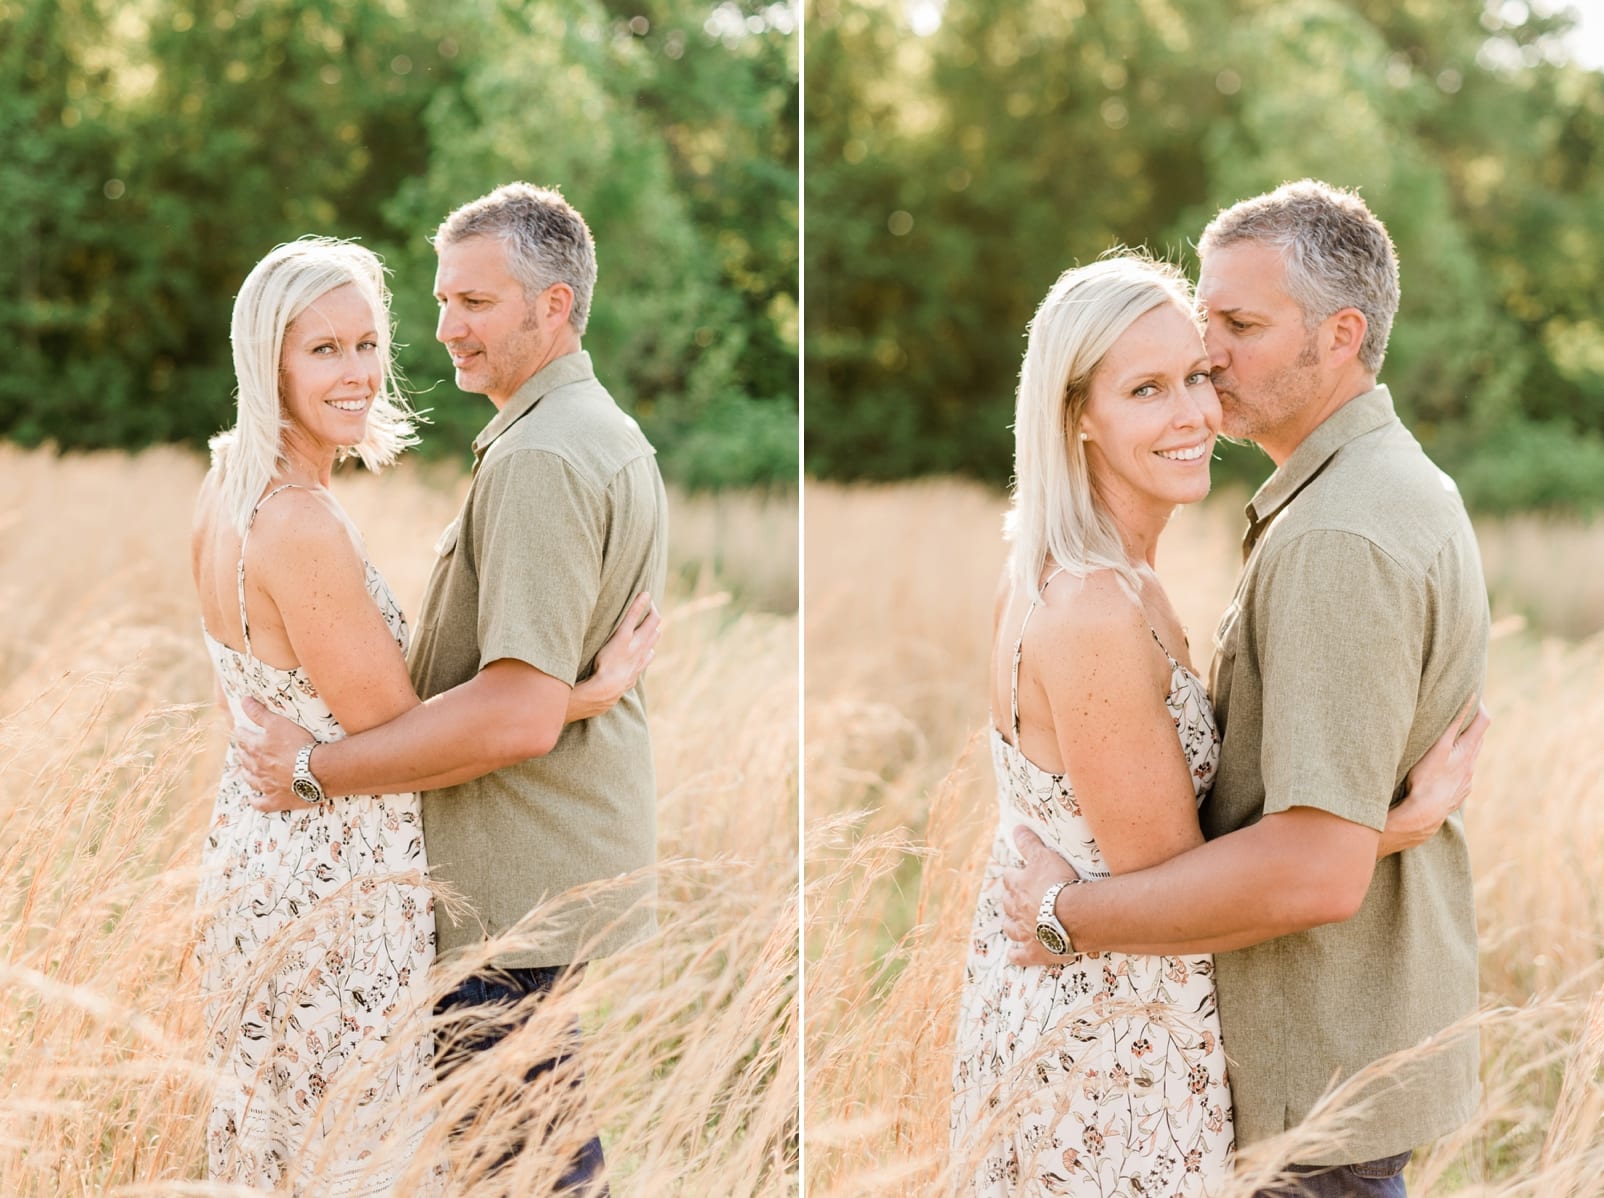 Wake Forest couple embracing in the middle of a wheat field at sunset photo